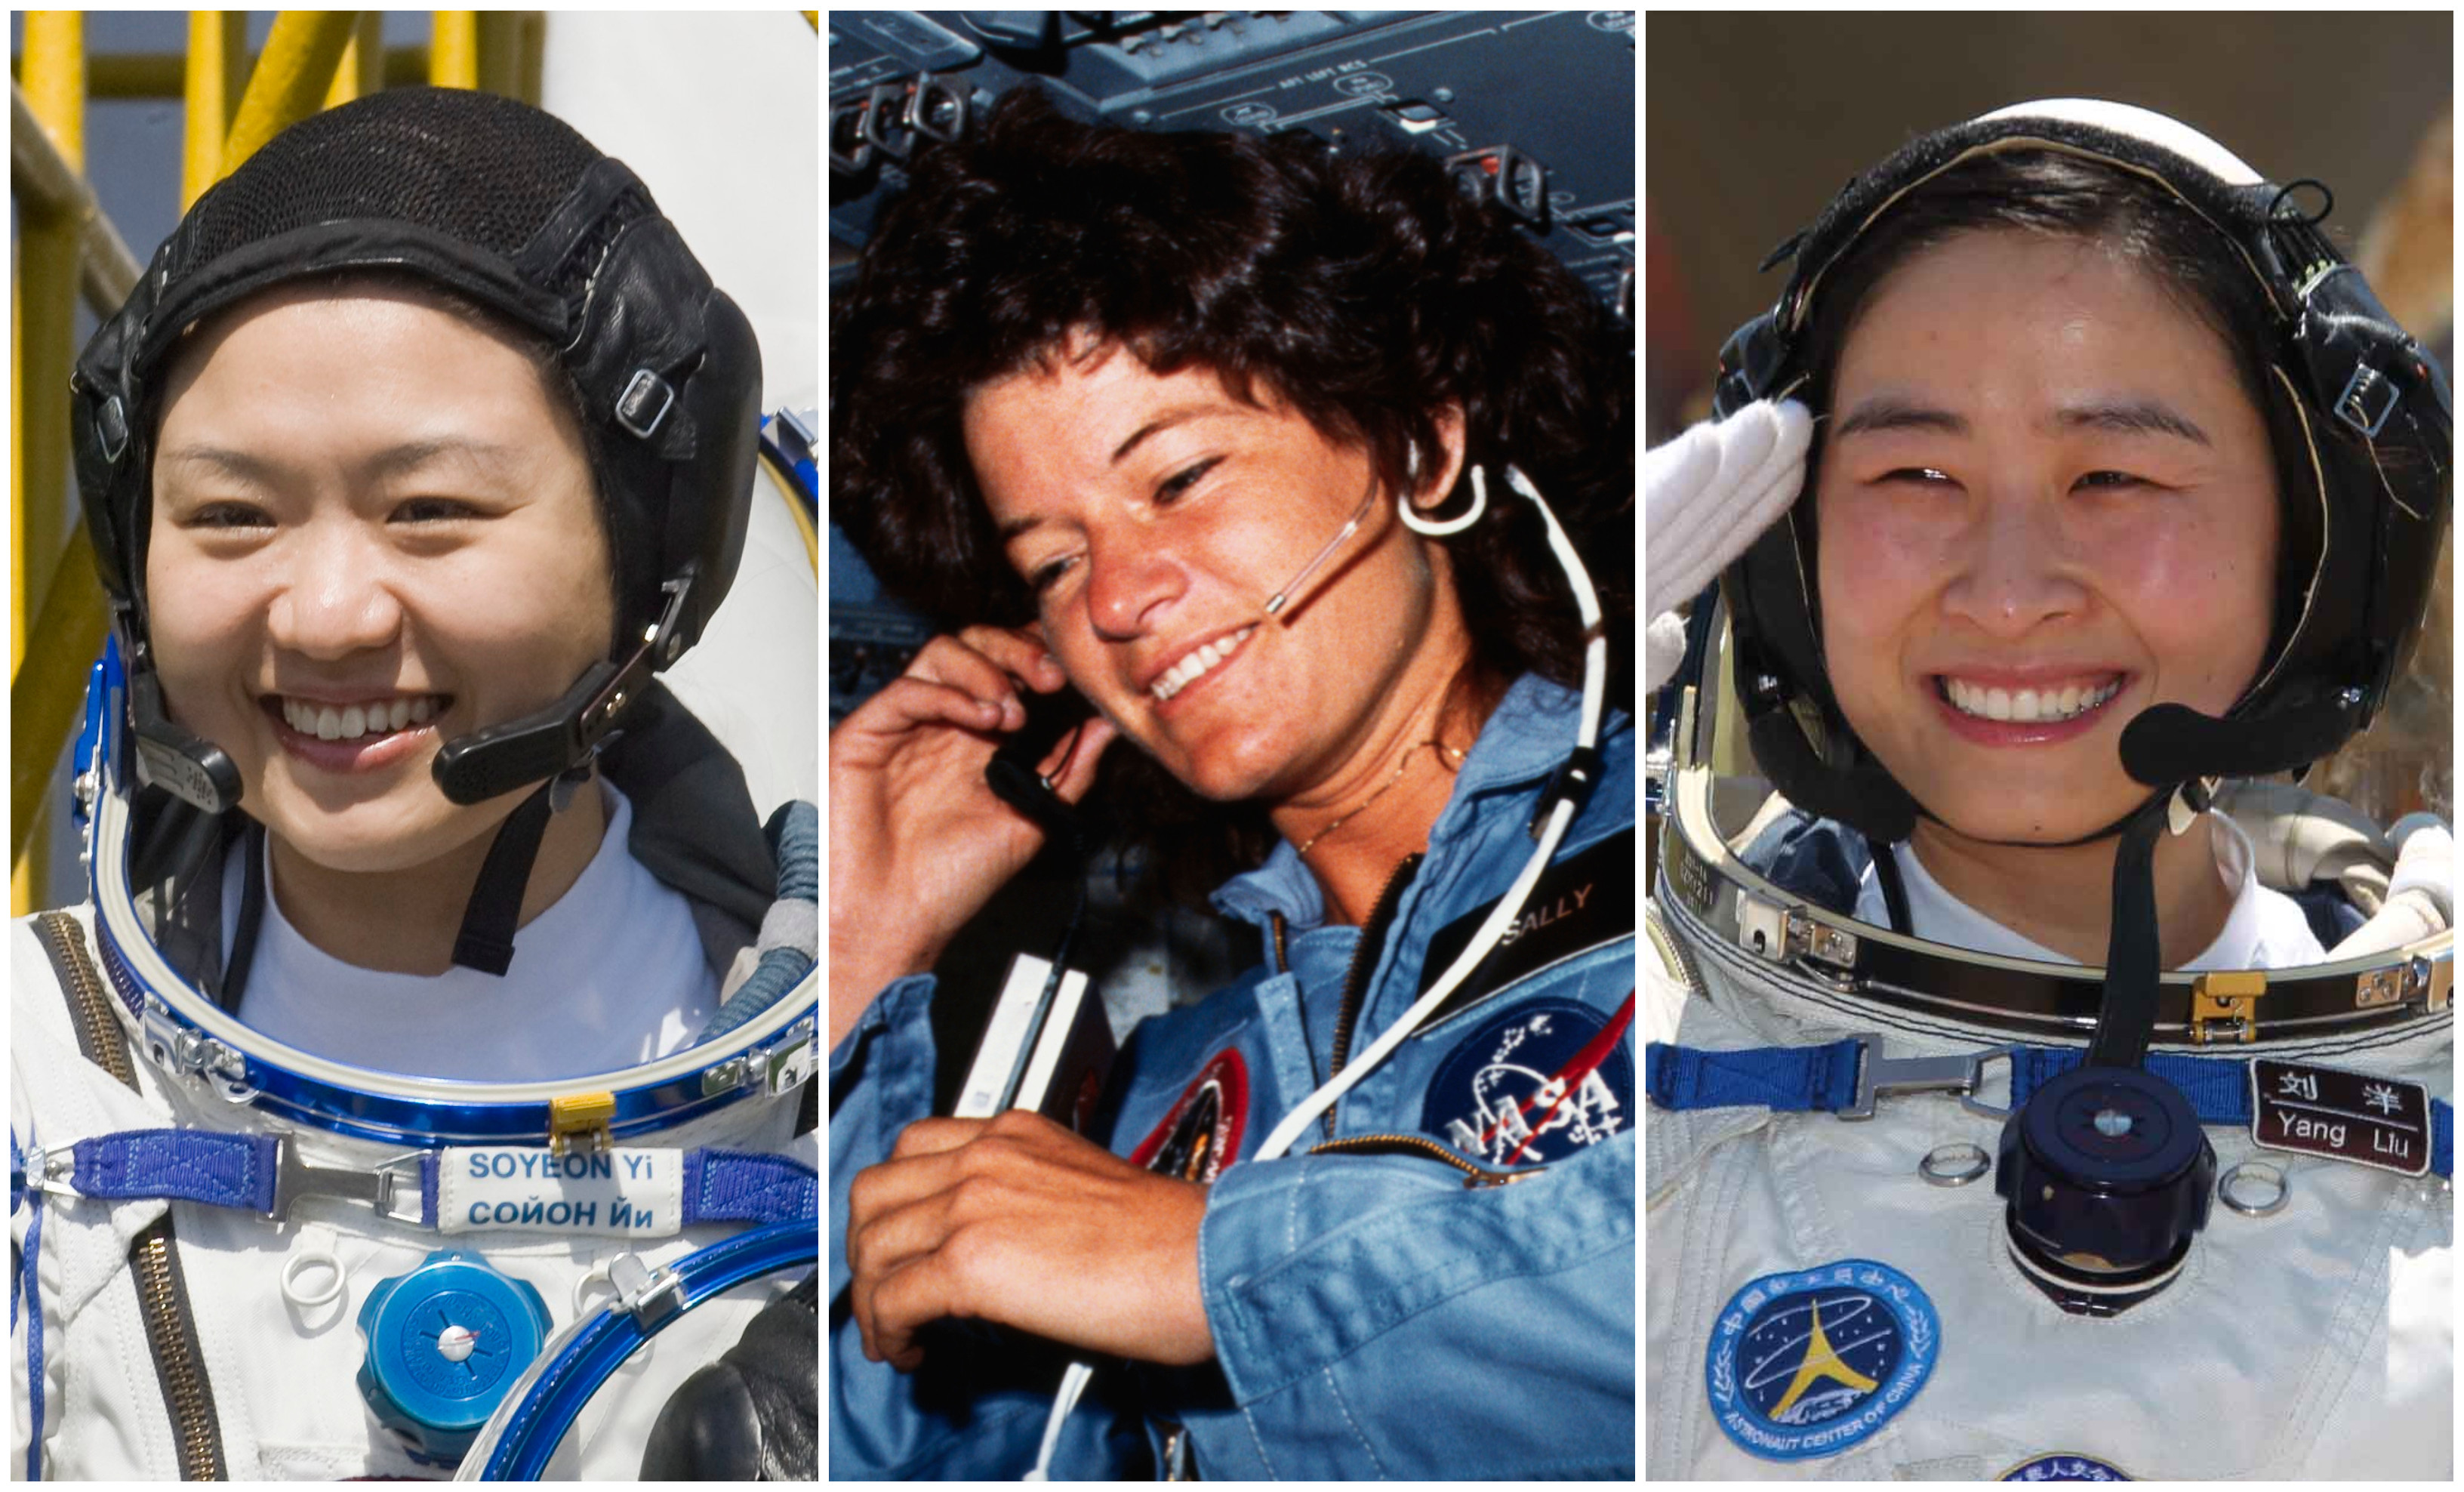 Korea, the US and China’s first female astronauts on the job. Photos: Reuters, Bettmann Archive, Xinhua